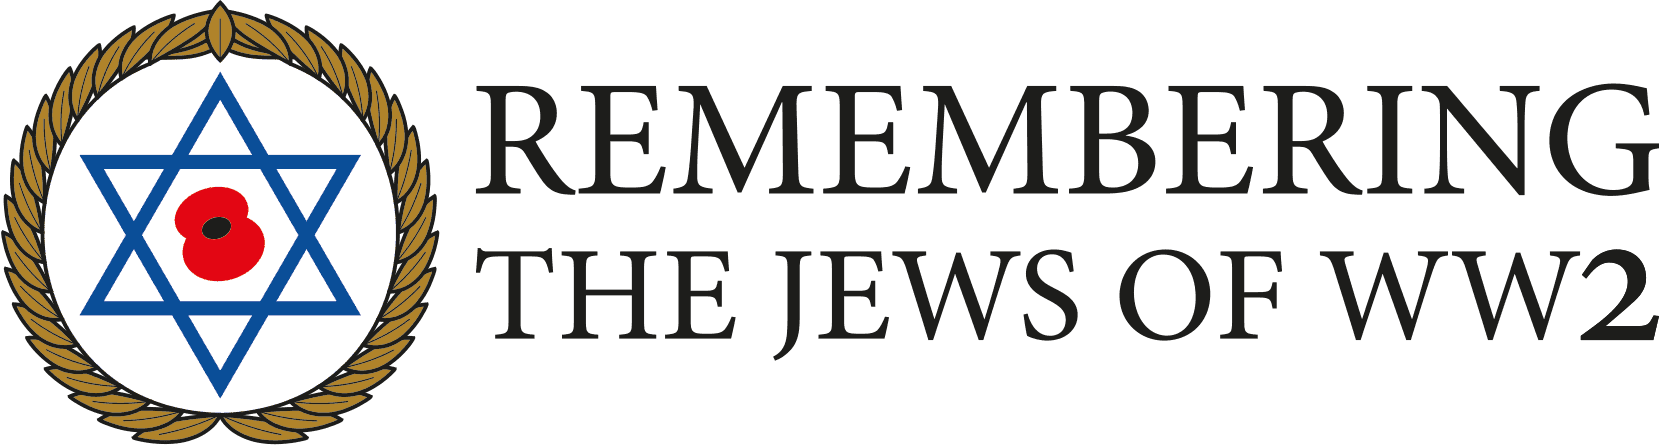 Remembering the Jews of WW2